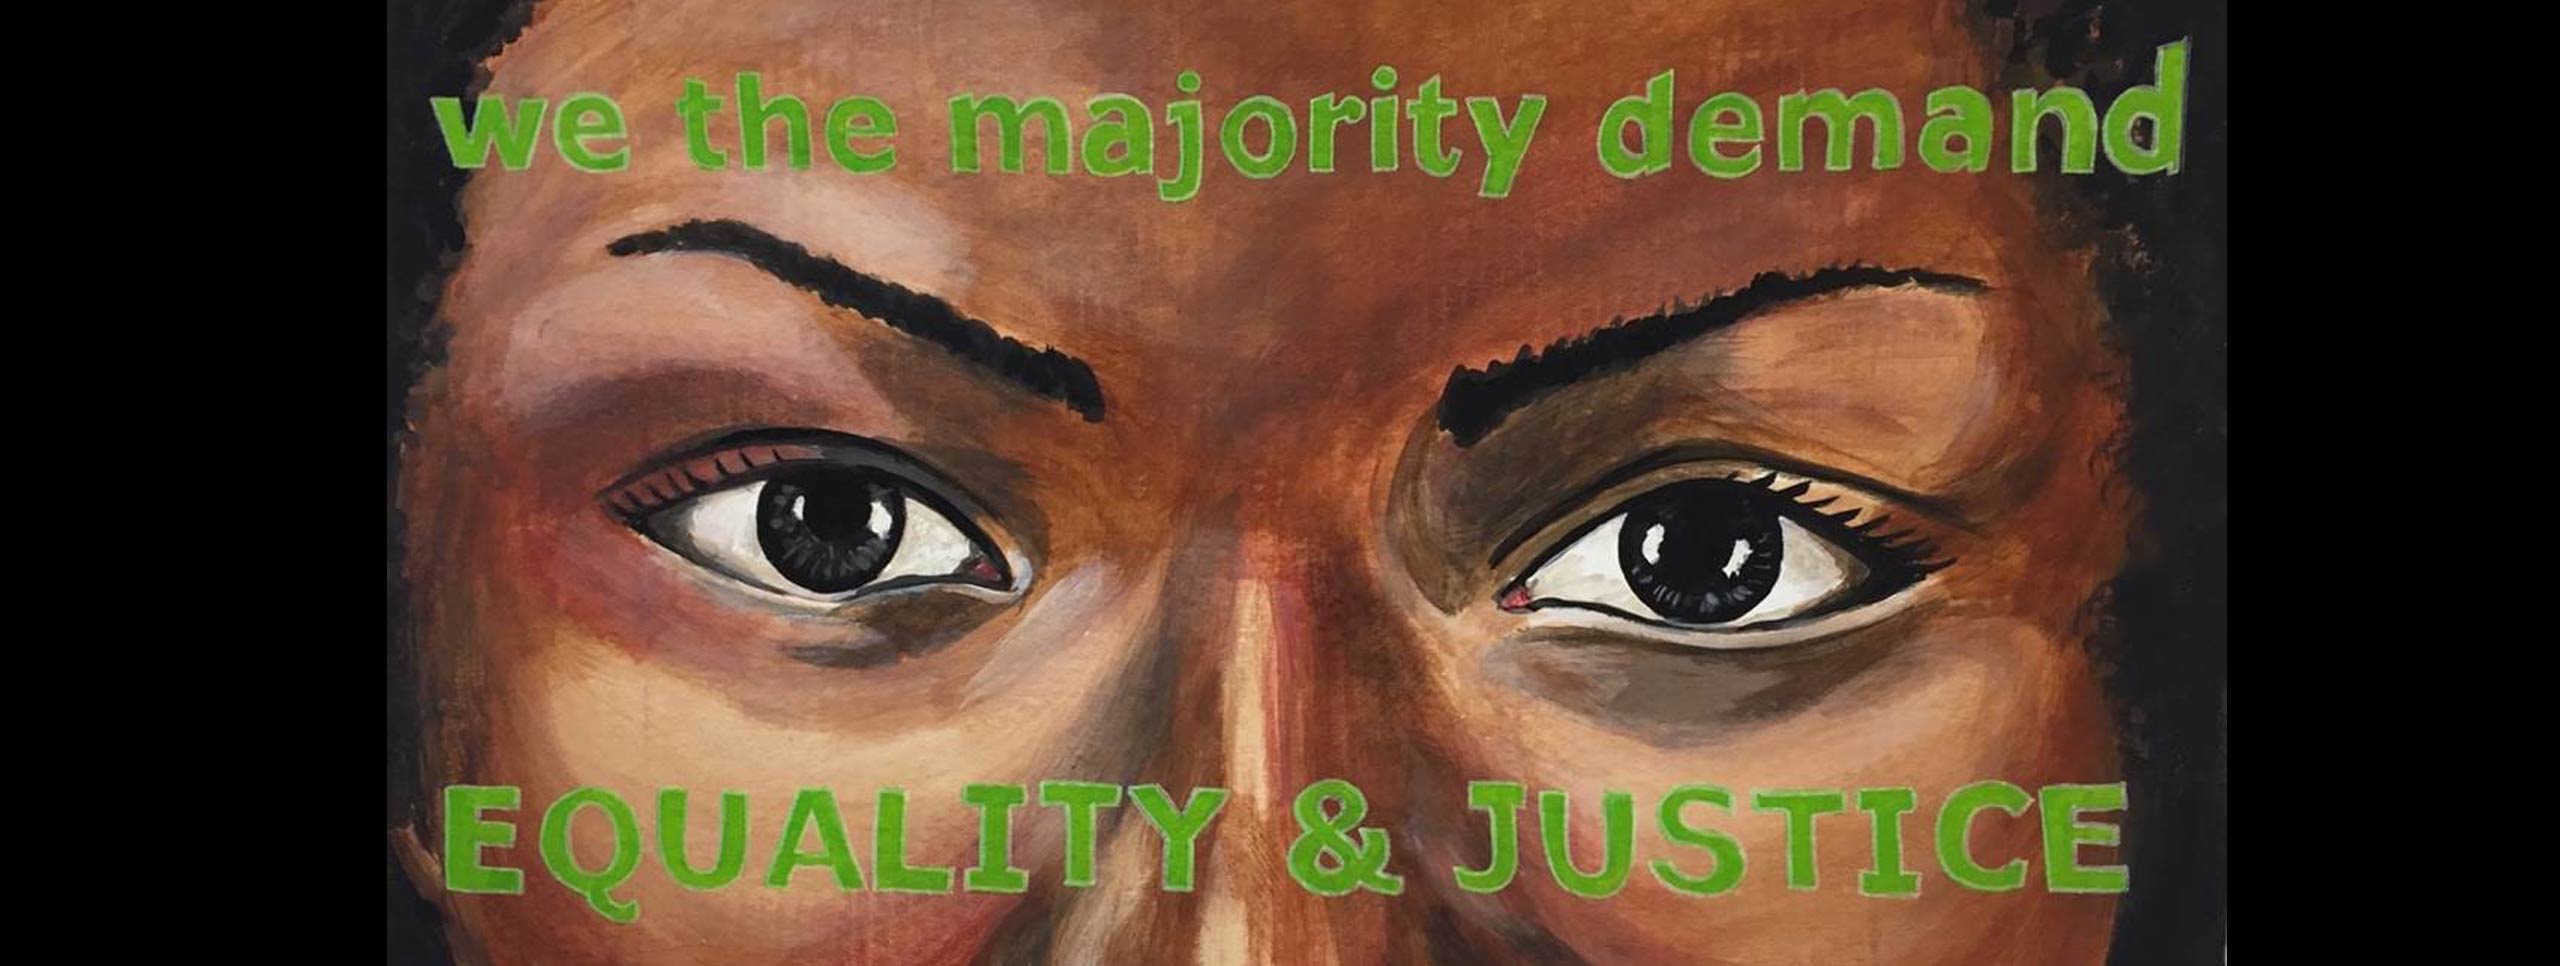 Painting of a woman’s eyes. Painted over her forehead and cheeks are the words “we the majority demand/EQUALITY & JUSTICE” 